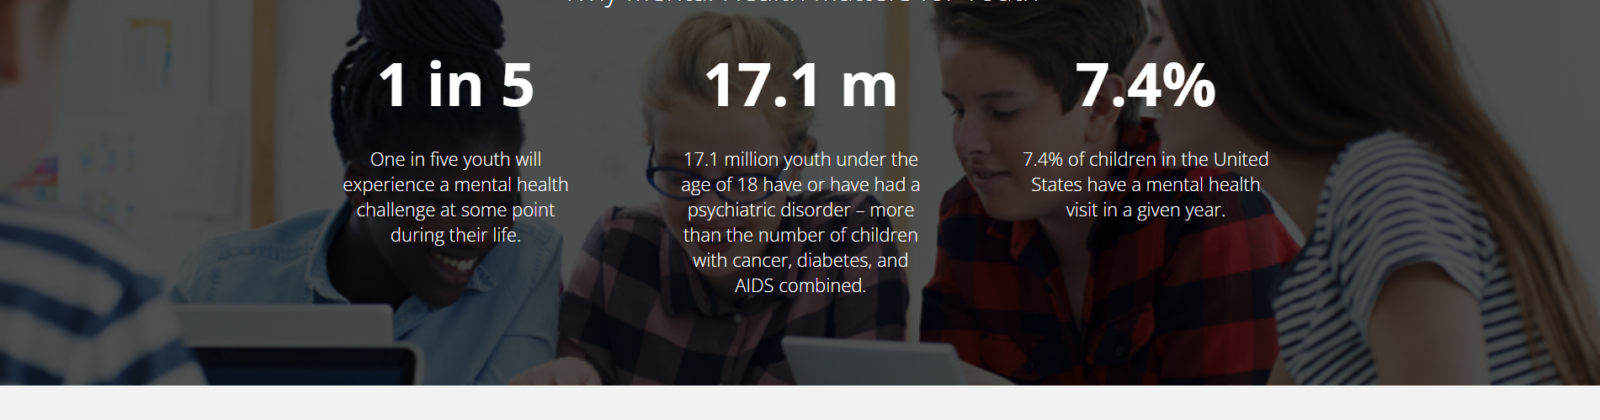 Header image shows statistics regarding youth mental health in the US. 1/5 of youth will face a mental health challenge in their lives, and 17.5% this year. 17.1 million youth have a psychiatric disorder, more than cancer, diabetes and AIDS combined.